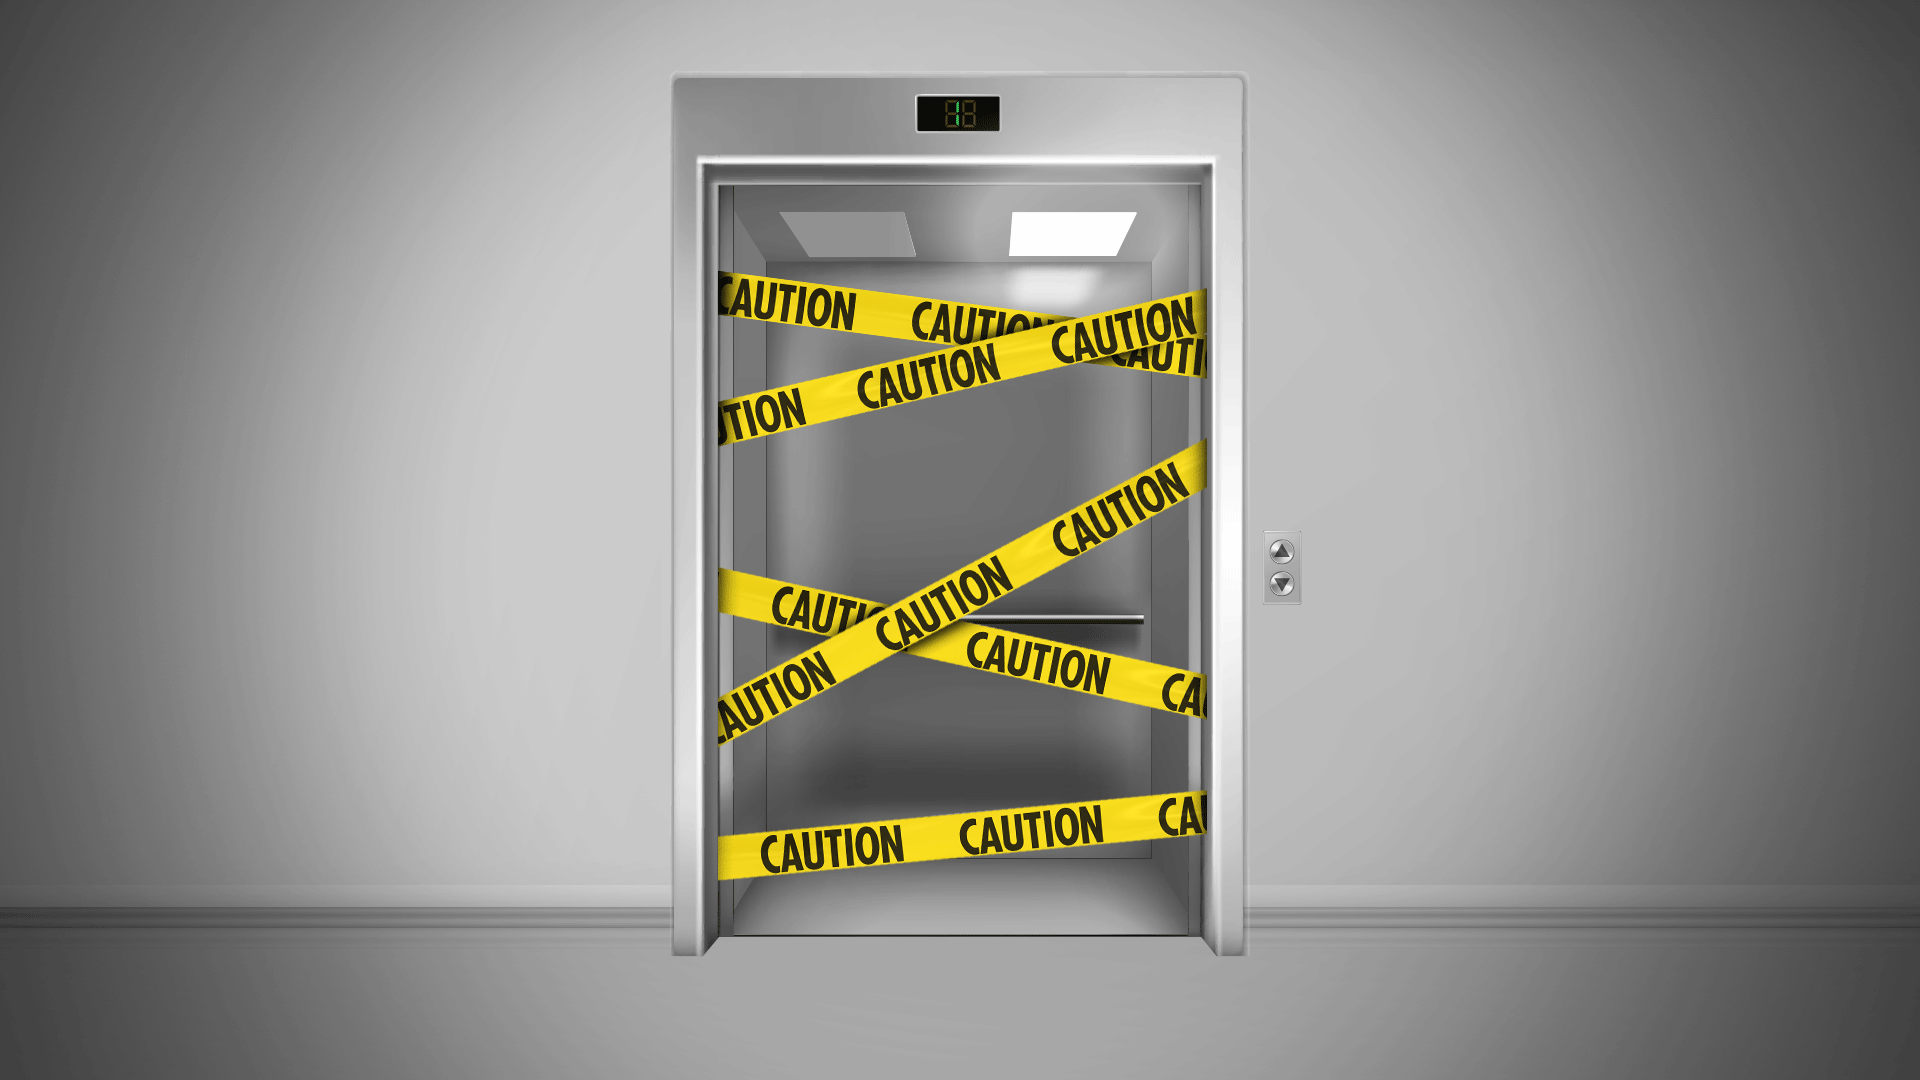 Illustration of an elevator with caution tape. The door is open and the light in the elevator is blinking.